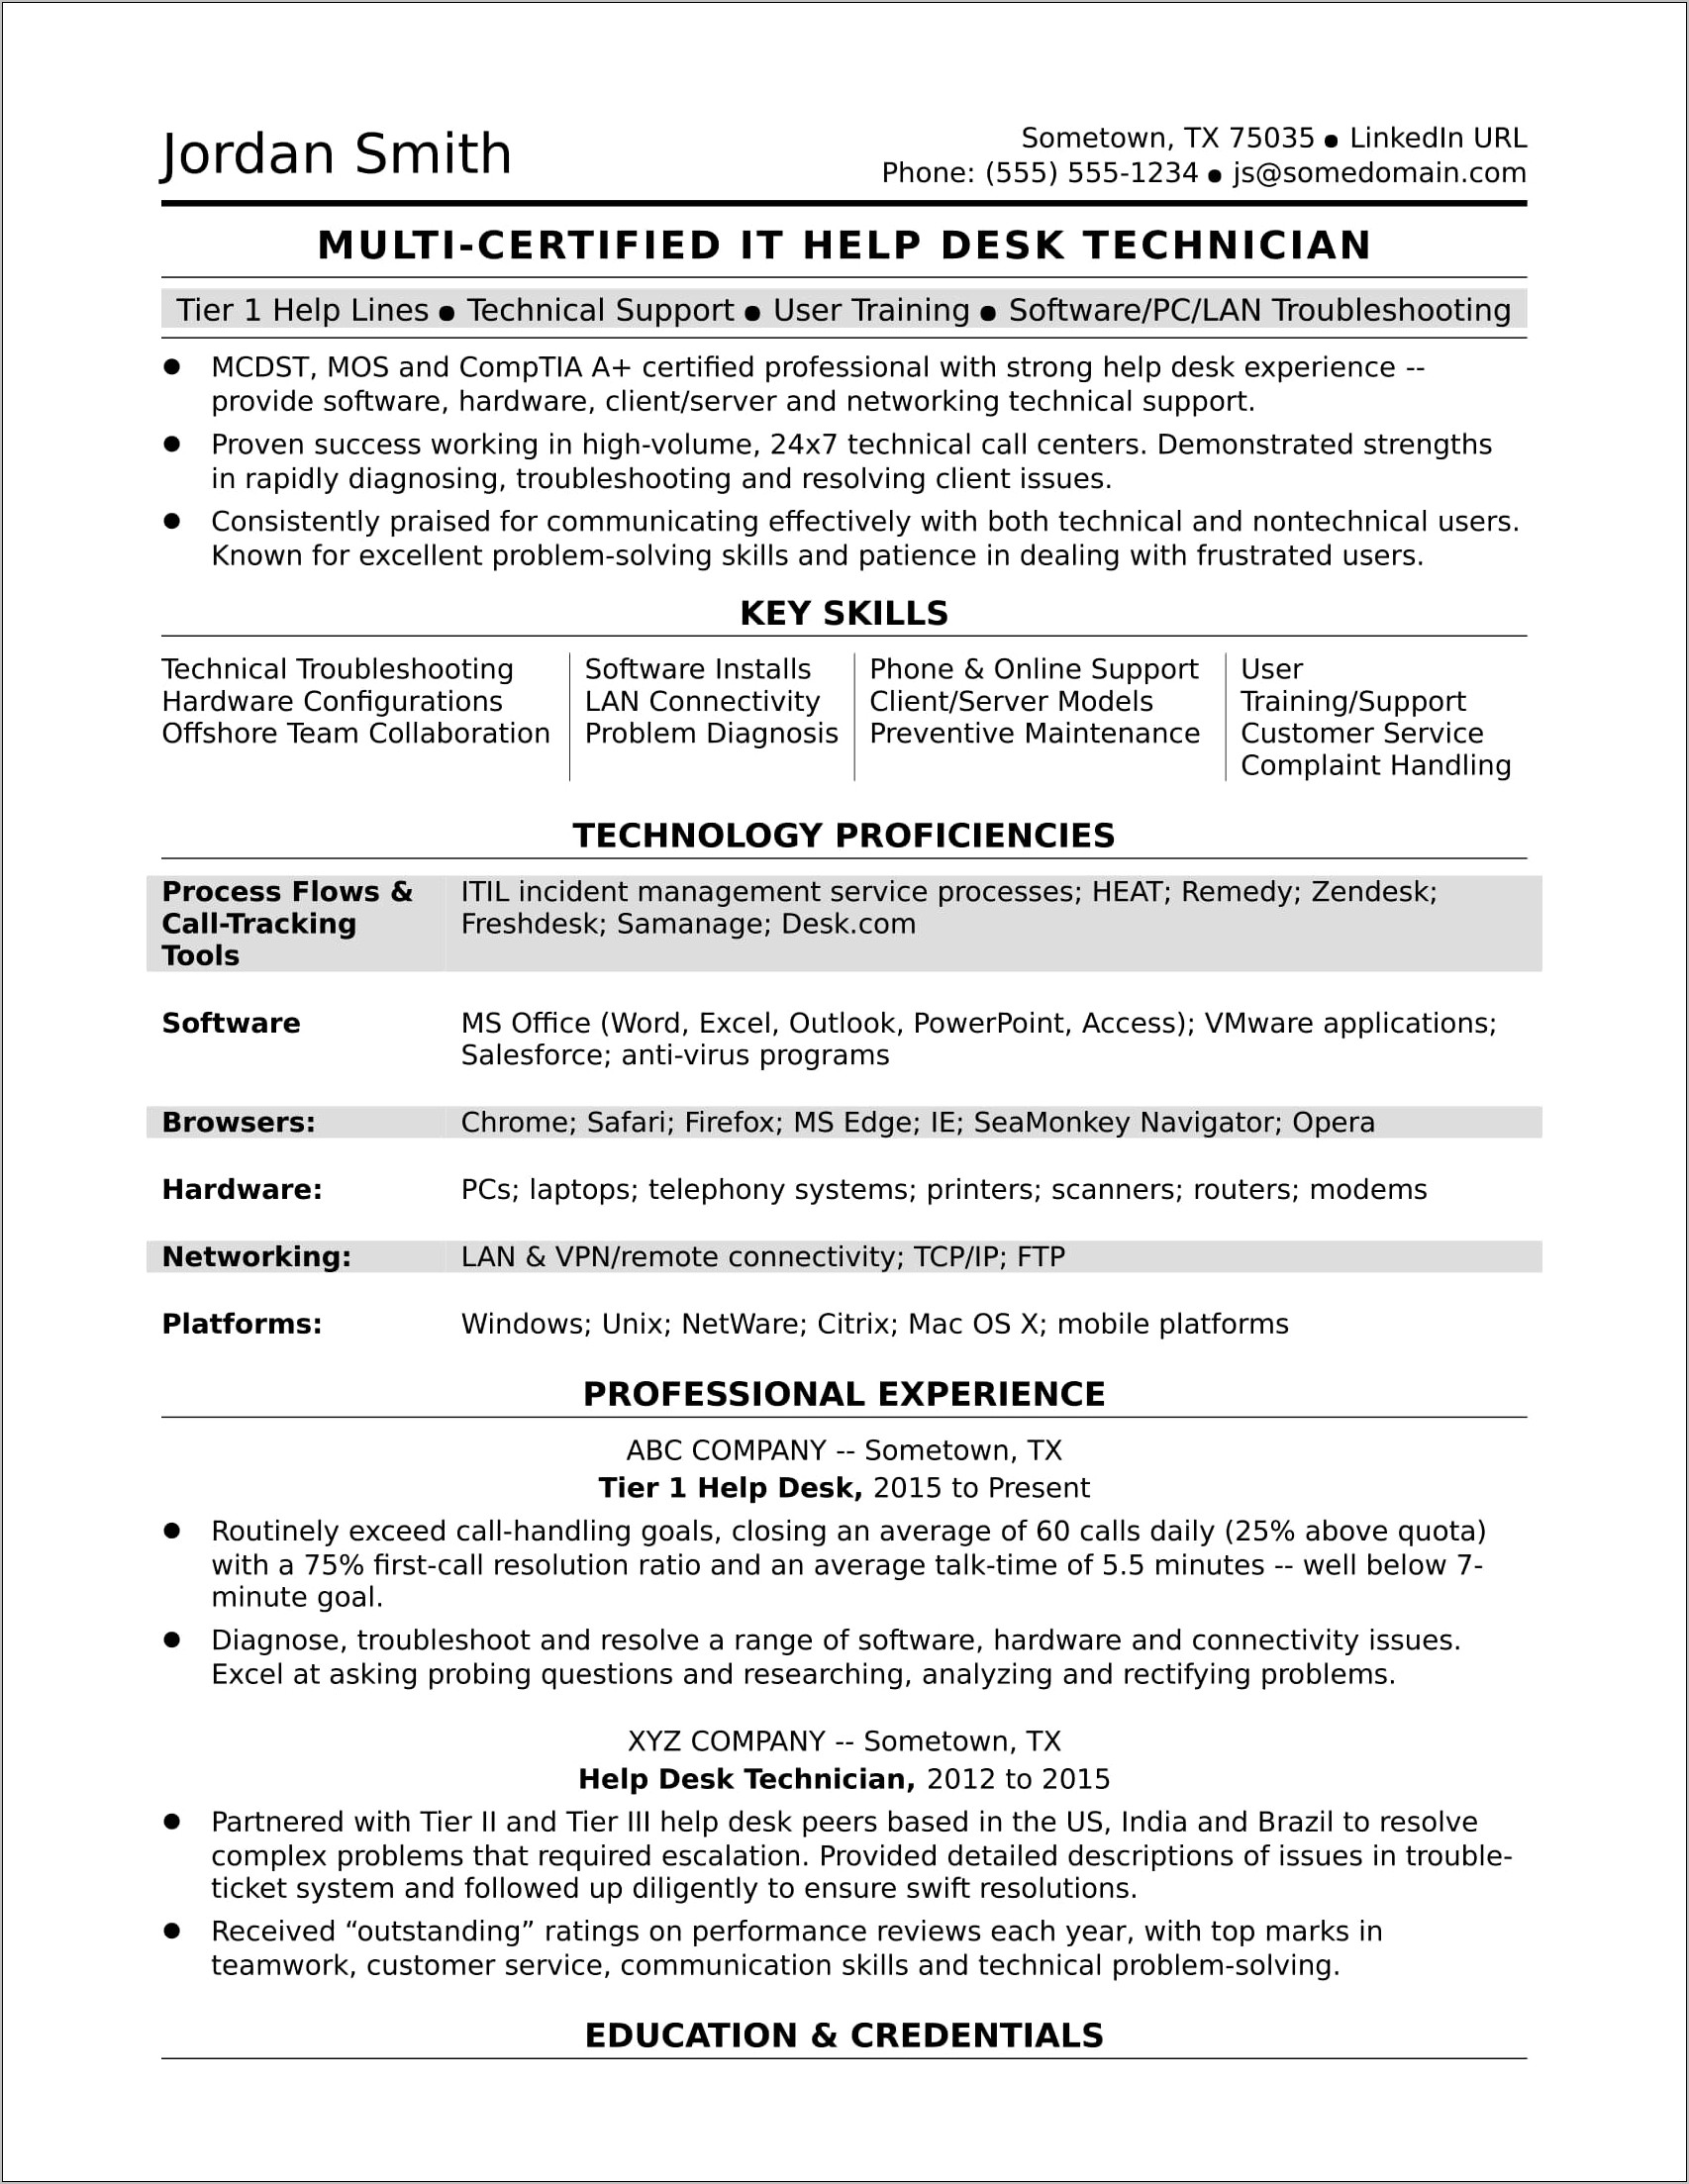 Skills Demonstrated As A Technical Writer For Resume